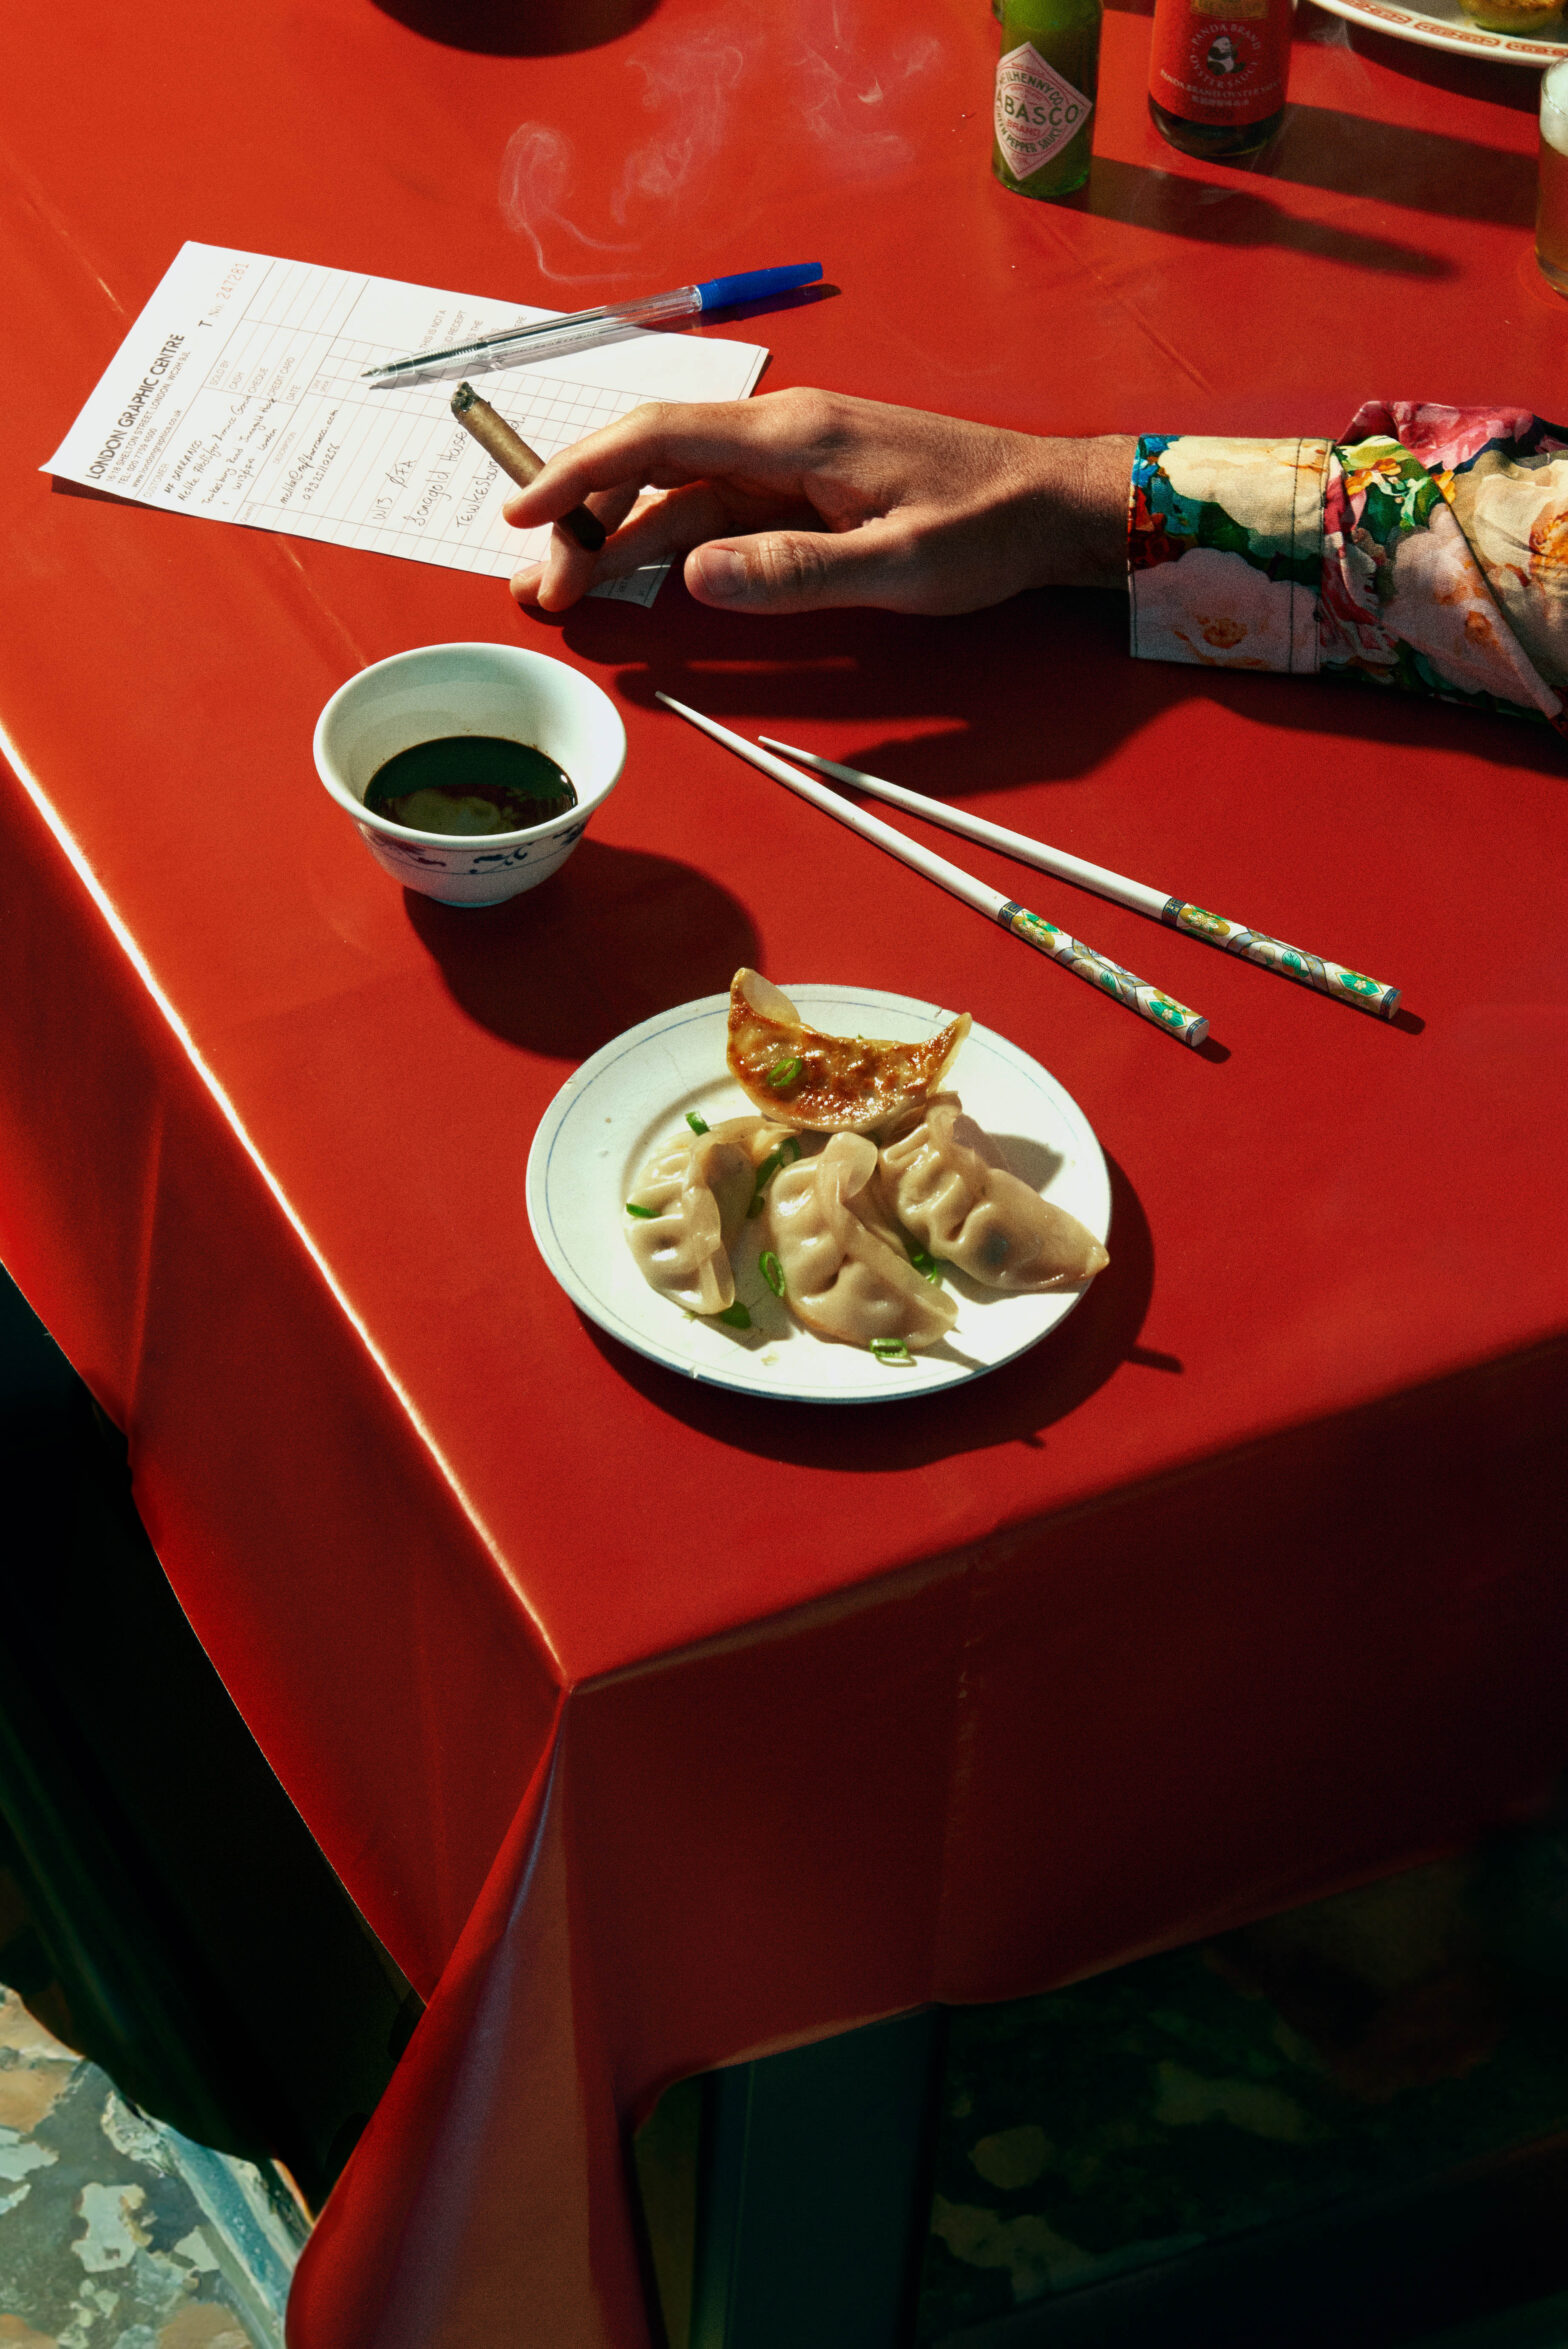 Male hand smoking cigar at the chineese restaurant table next to a plate of gyozas.